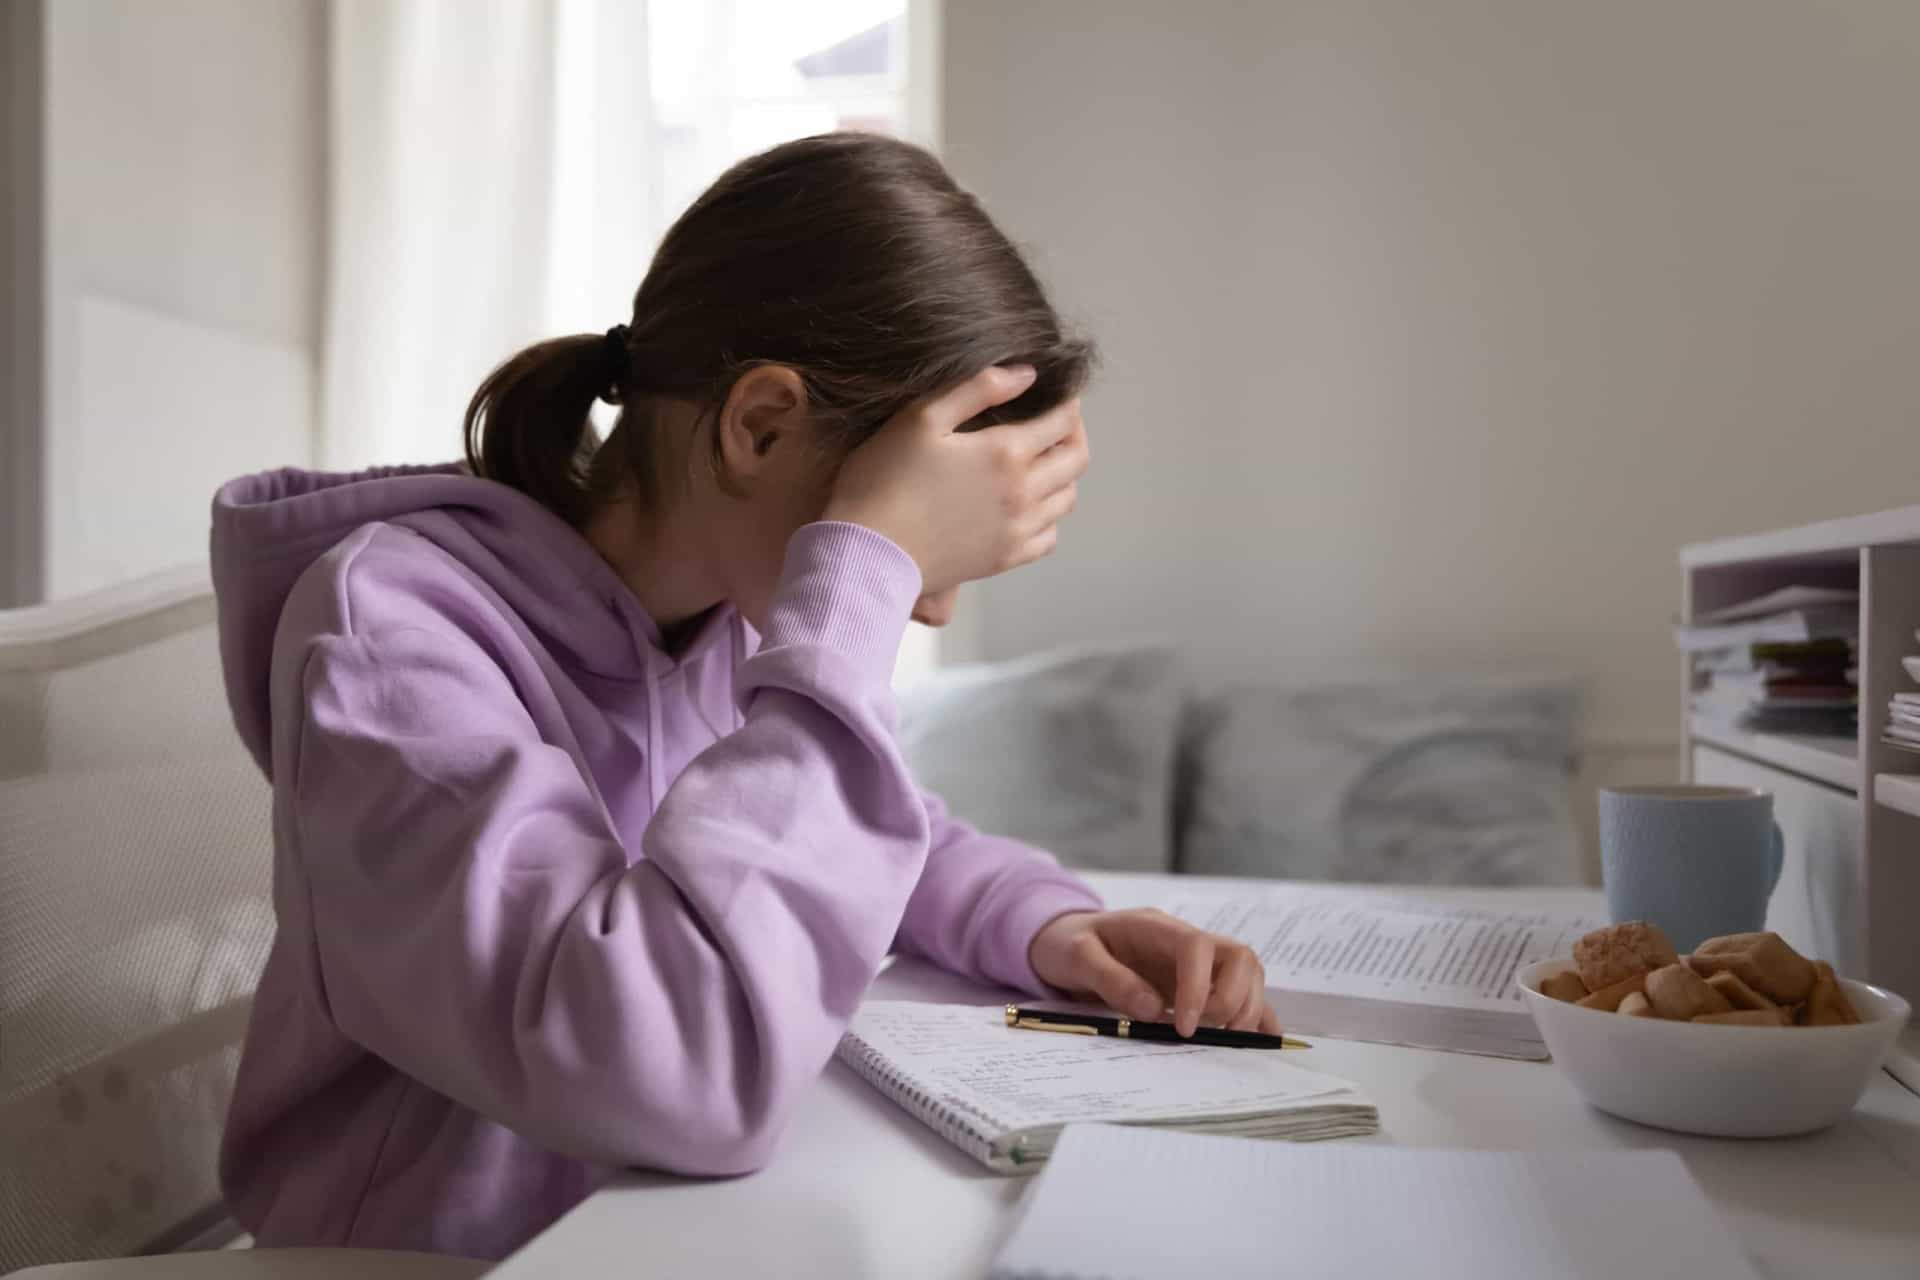 <p><span>Children who suffer from selective mutism generally have a tendency towards anxiety and may find it difficult to take everyday events in their stride.</span></p><p>You may also like:<a href="https://www.starsinsider.com/n/281704?utm_source=msn.com&utm_medium=display&utm_campaign=referral_description&utm_content=521574en-sg"> Vlad the Impaler and the legend of Dracula</a></p>